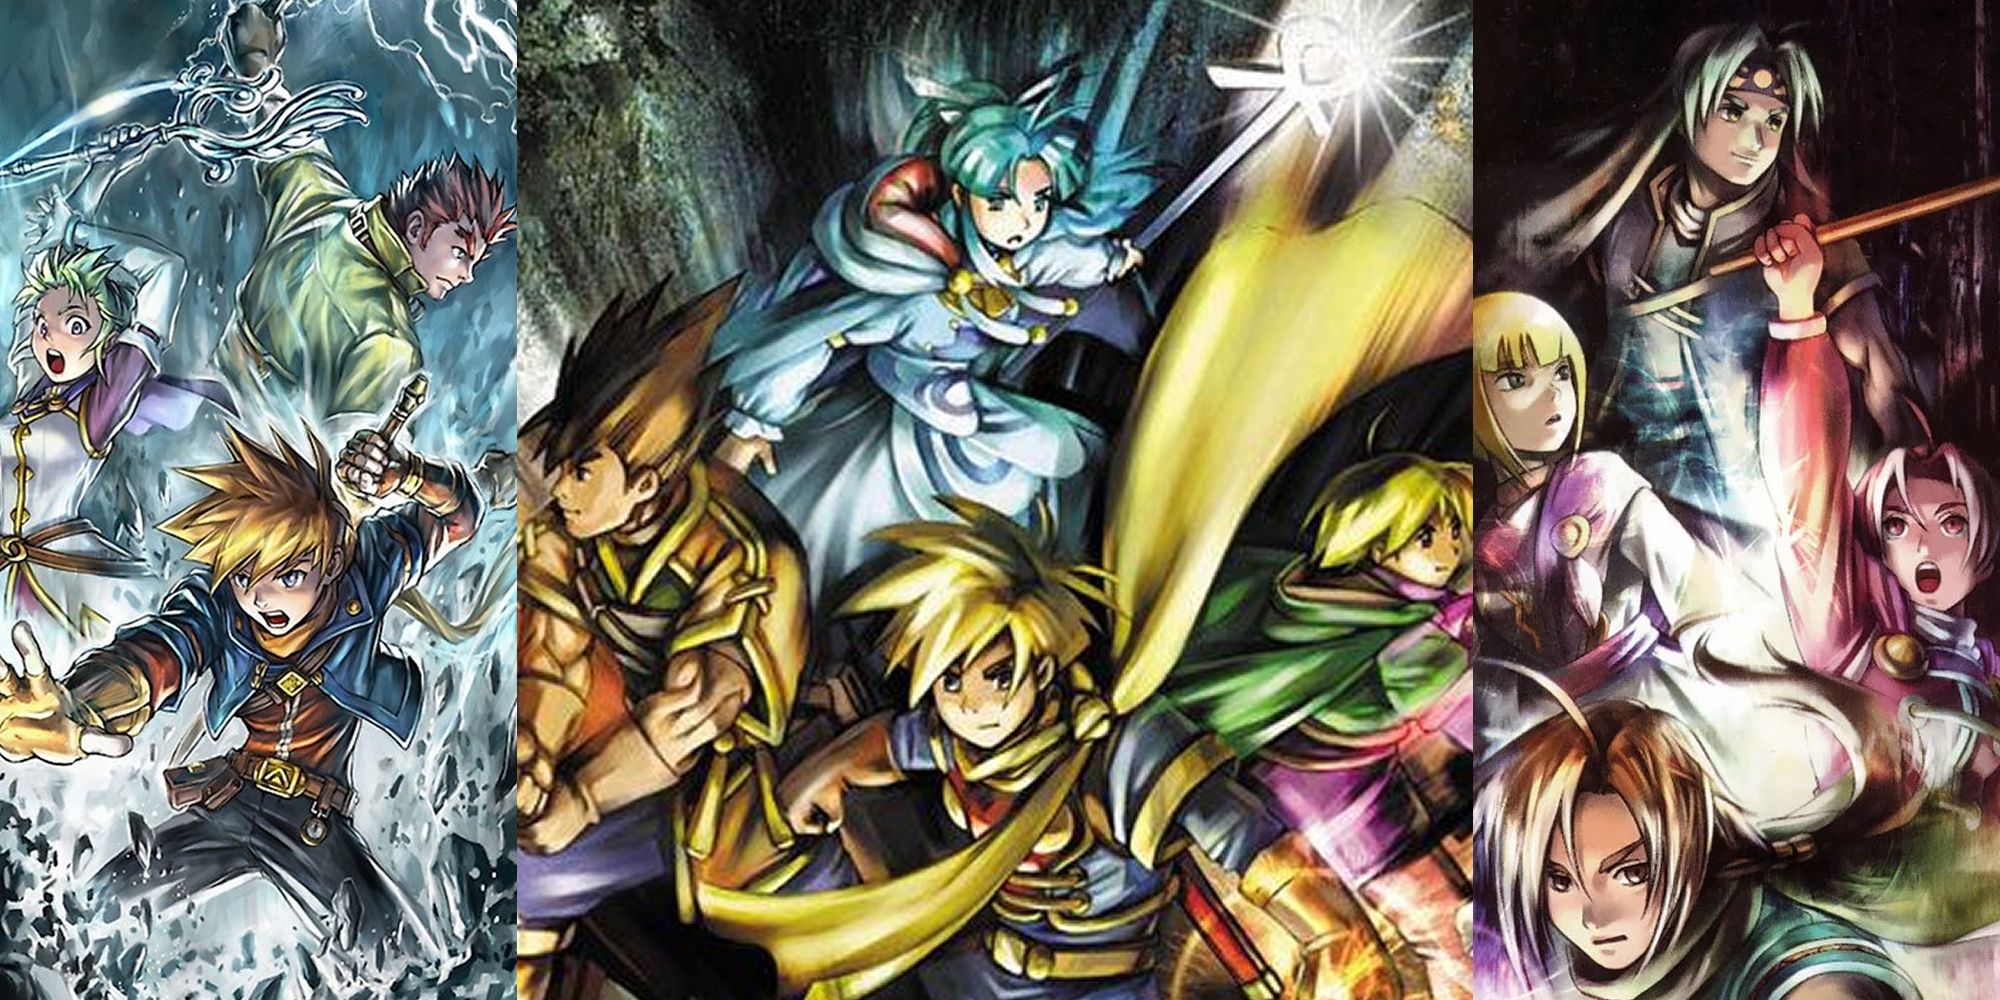 A Split Image Depicting Character Art Of The Heroes In The Golden Sun Series